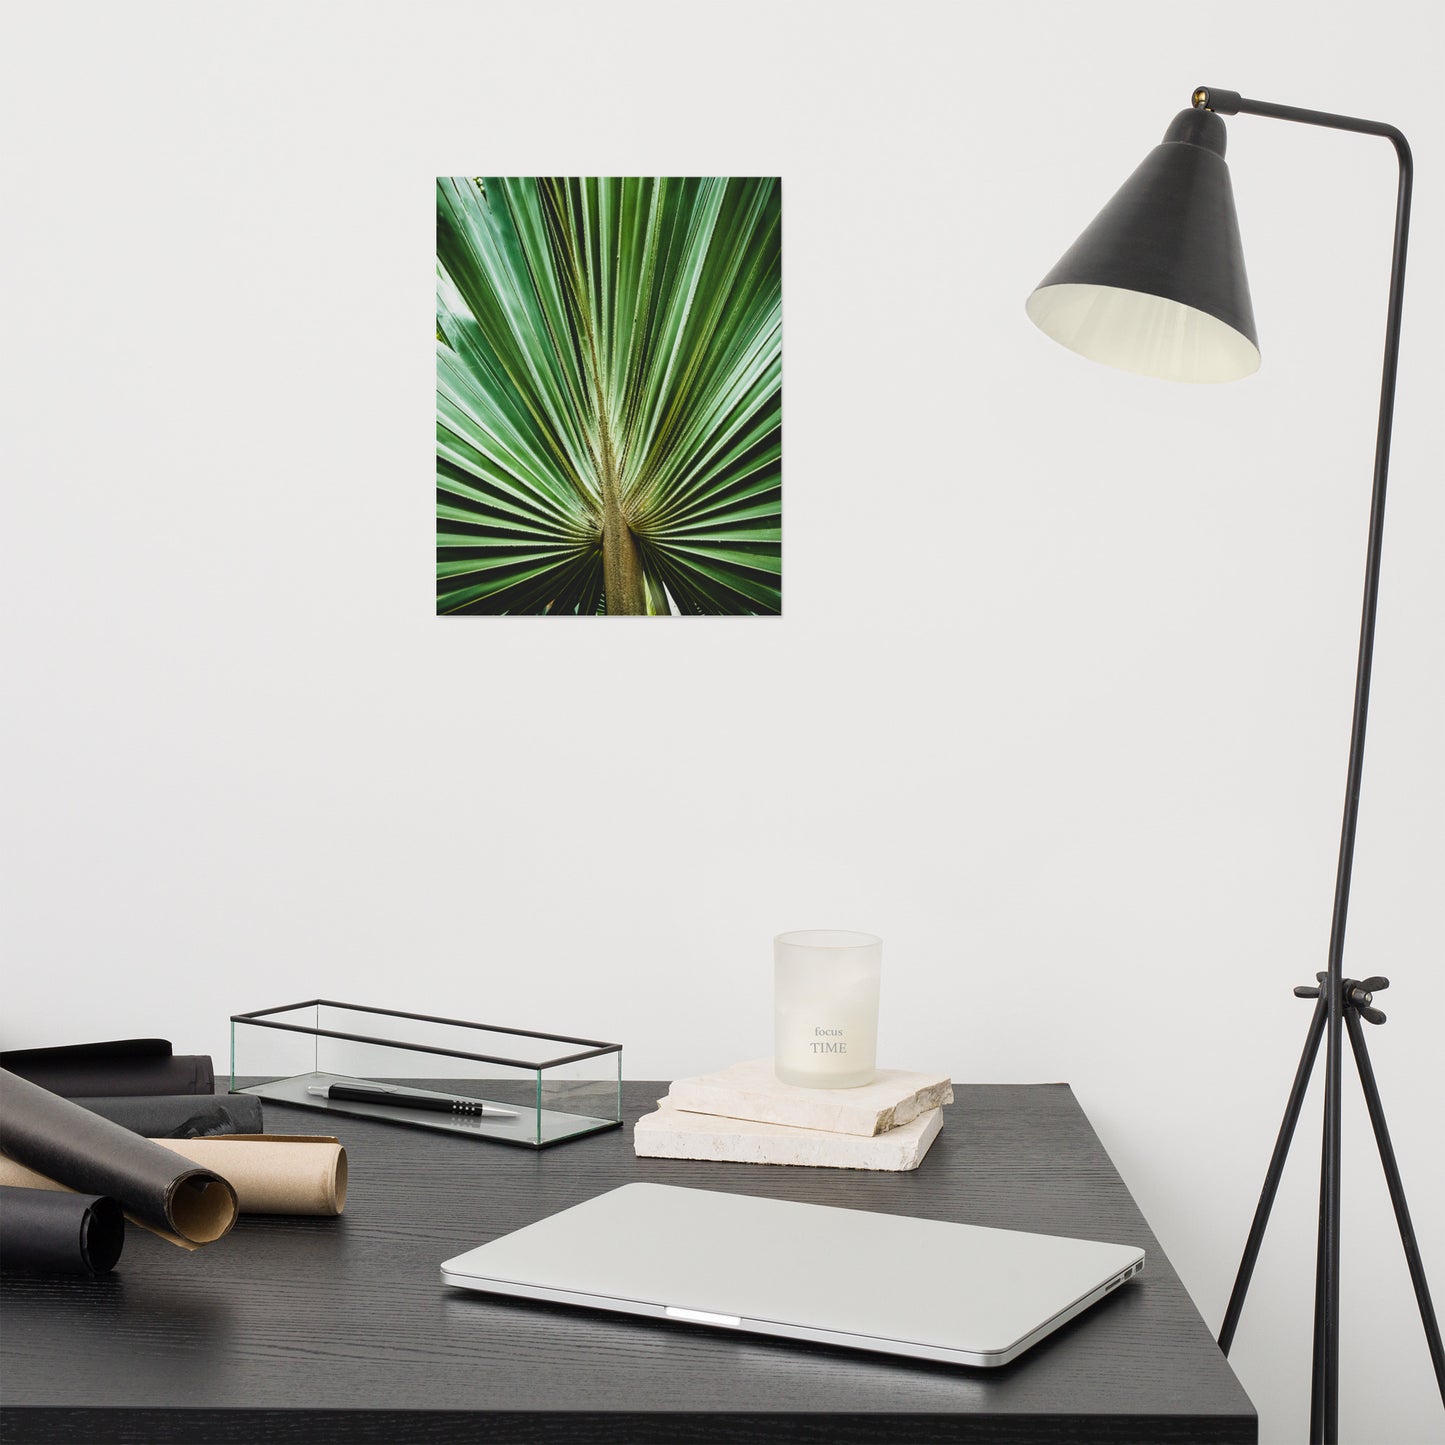 Medical Office Artwork: Aged and Colorized Wide Palm Leaves 2 - Botanical / Plants / Nature Photograph Loose / Unframed Wall Art Print - Artwork